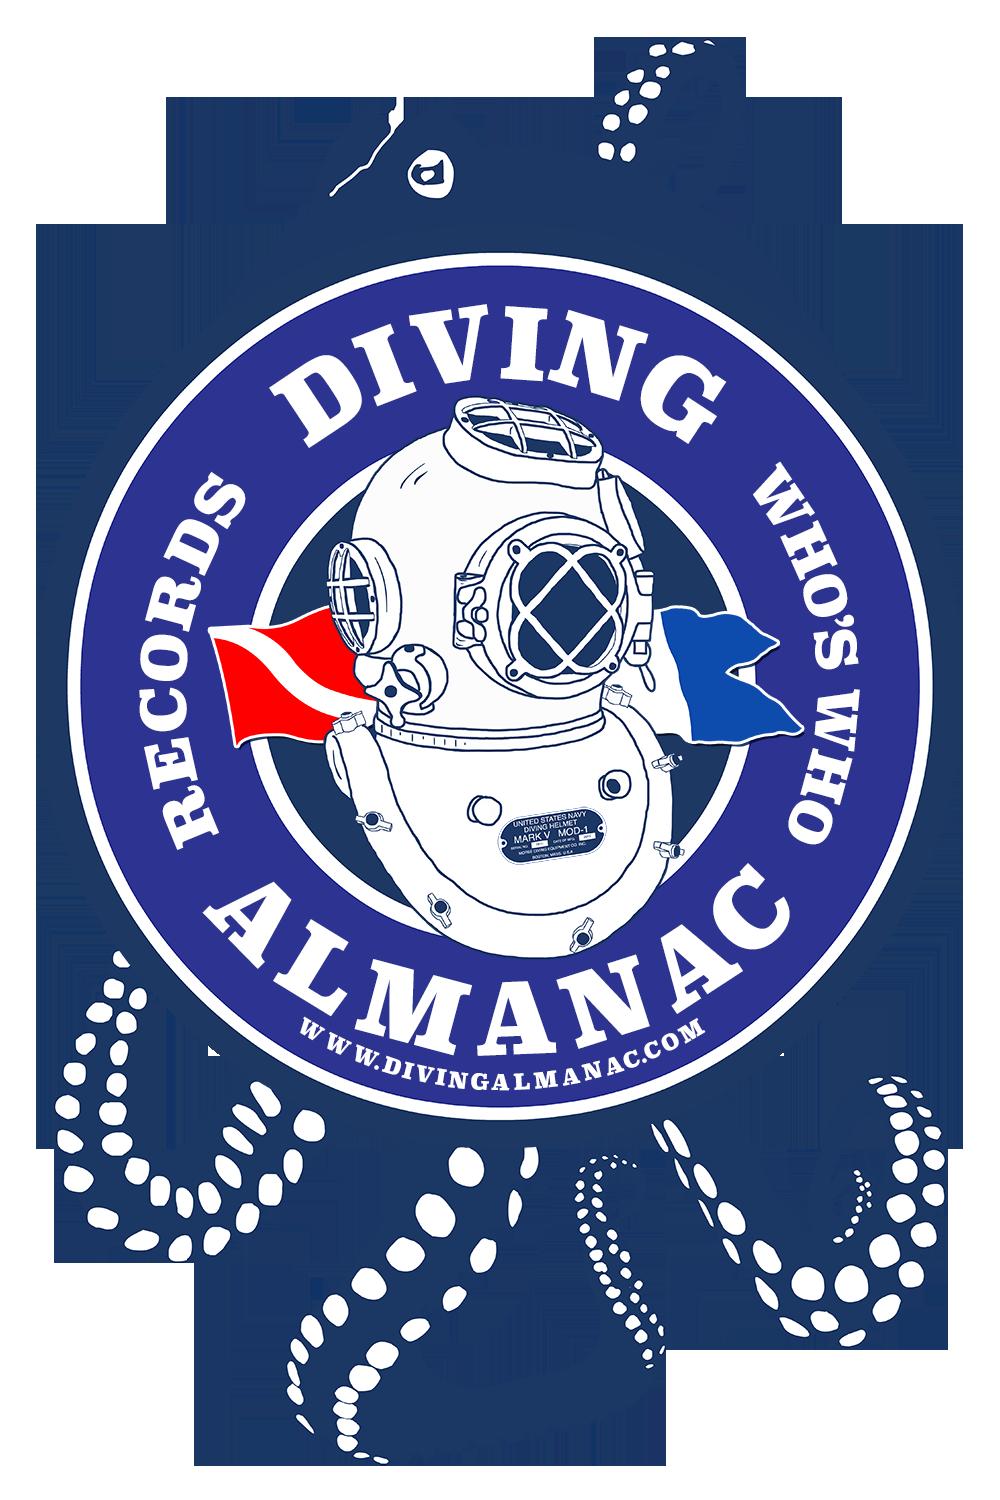 Praise for the Diving Almanac P I erhaps the best single reference ever published for divers. Undercurrent Magazine t s the best reference on diving. Ever.